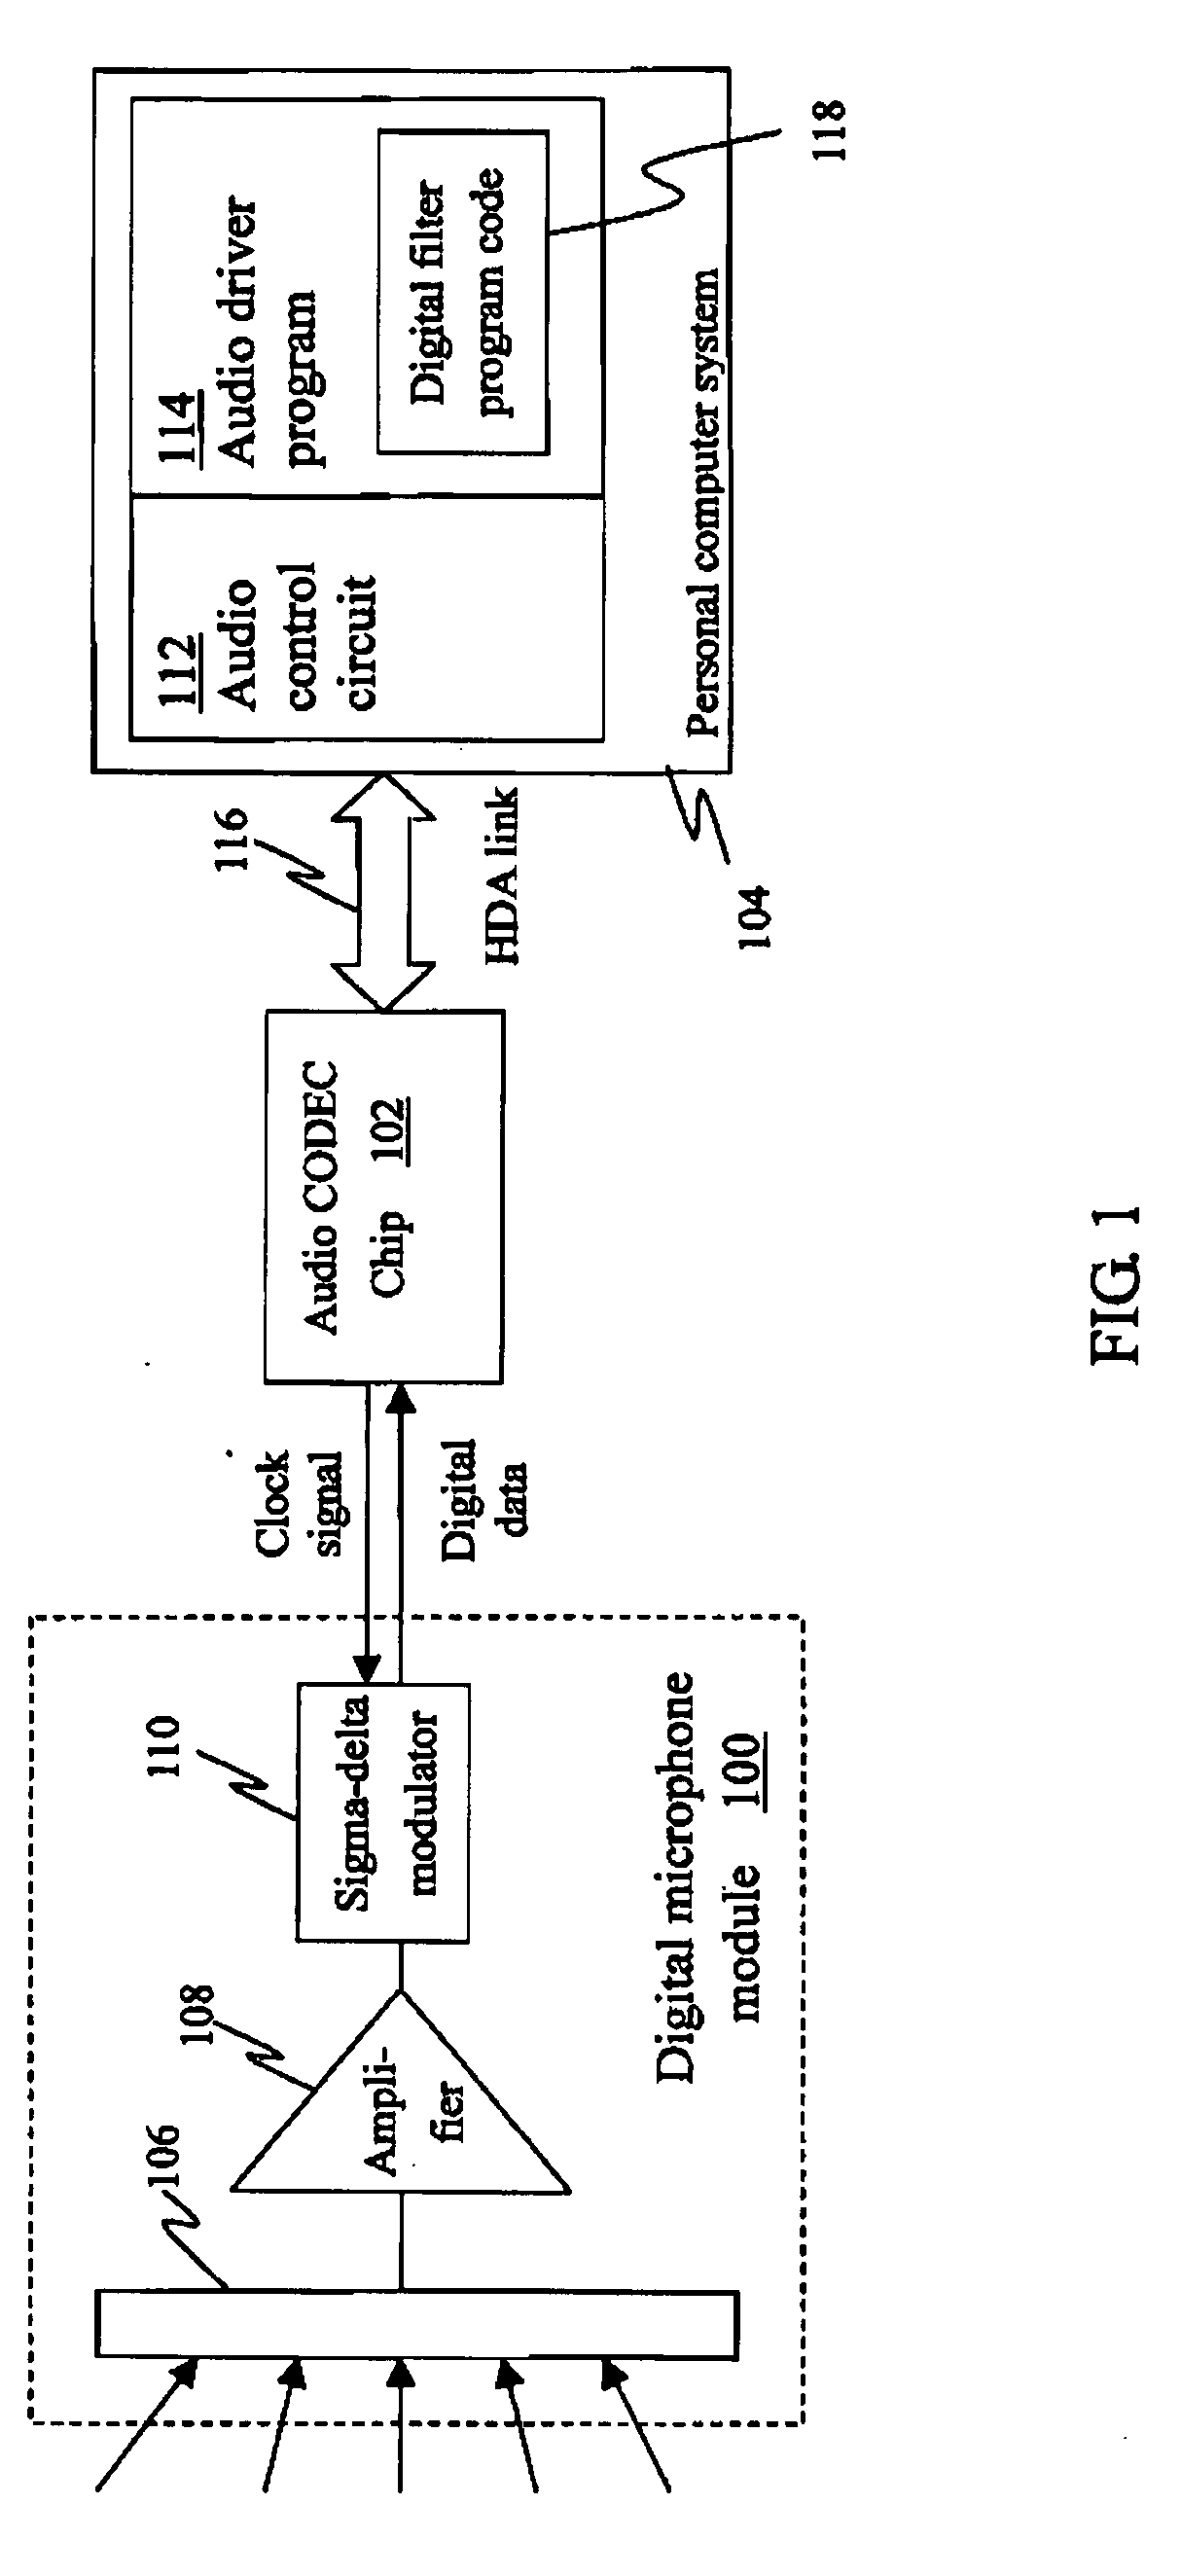 Digital microphone system and method thereof